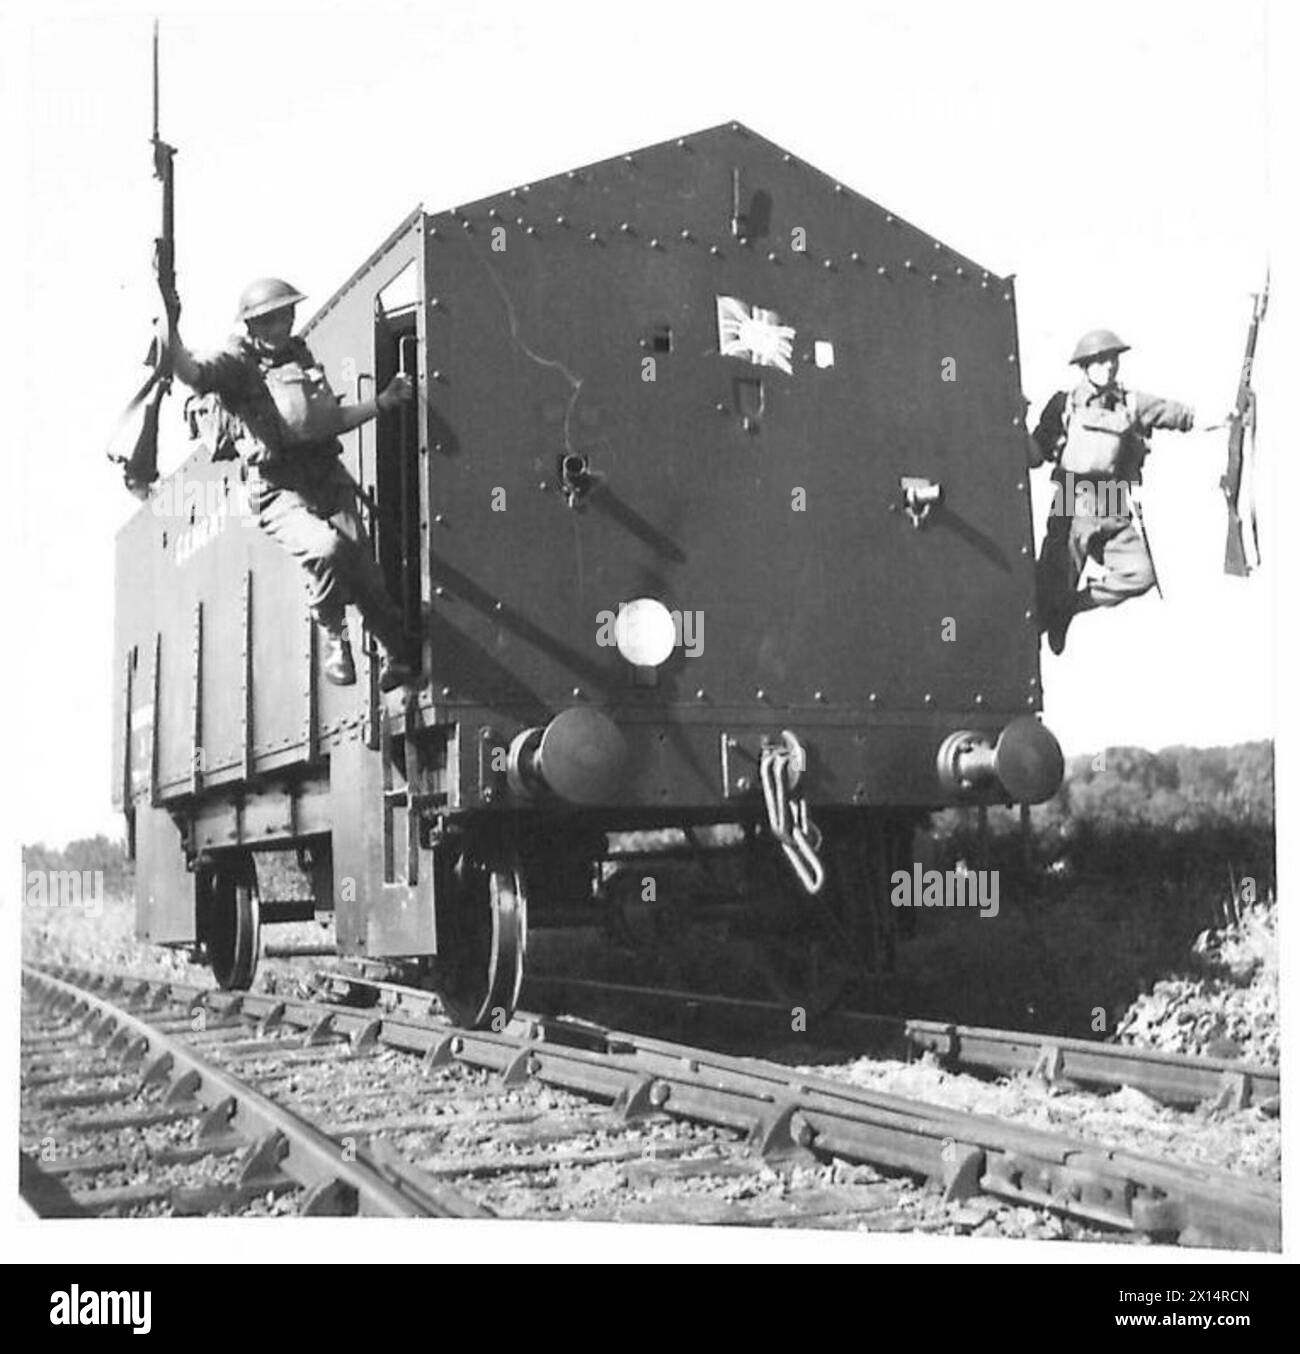 OFF THE TROLLEY AND INTO THE SCRAP - Troops leaping from an armoured rail trolley to contact the enemy who were though to be tampering with the permanent way British Army Stock Photo